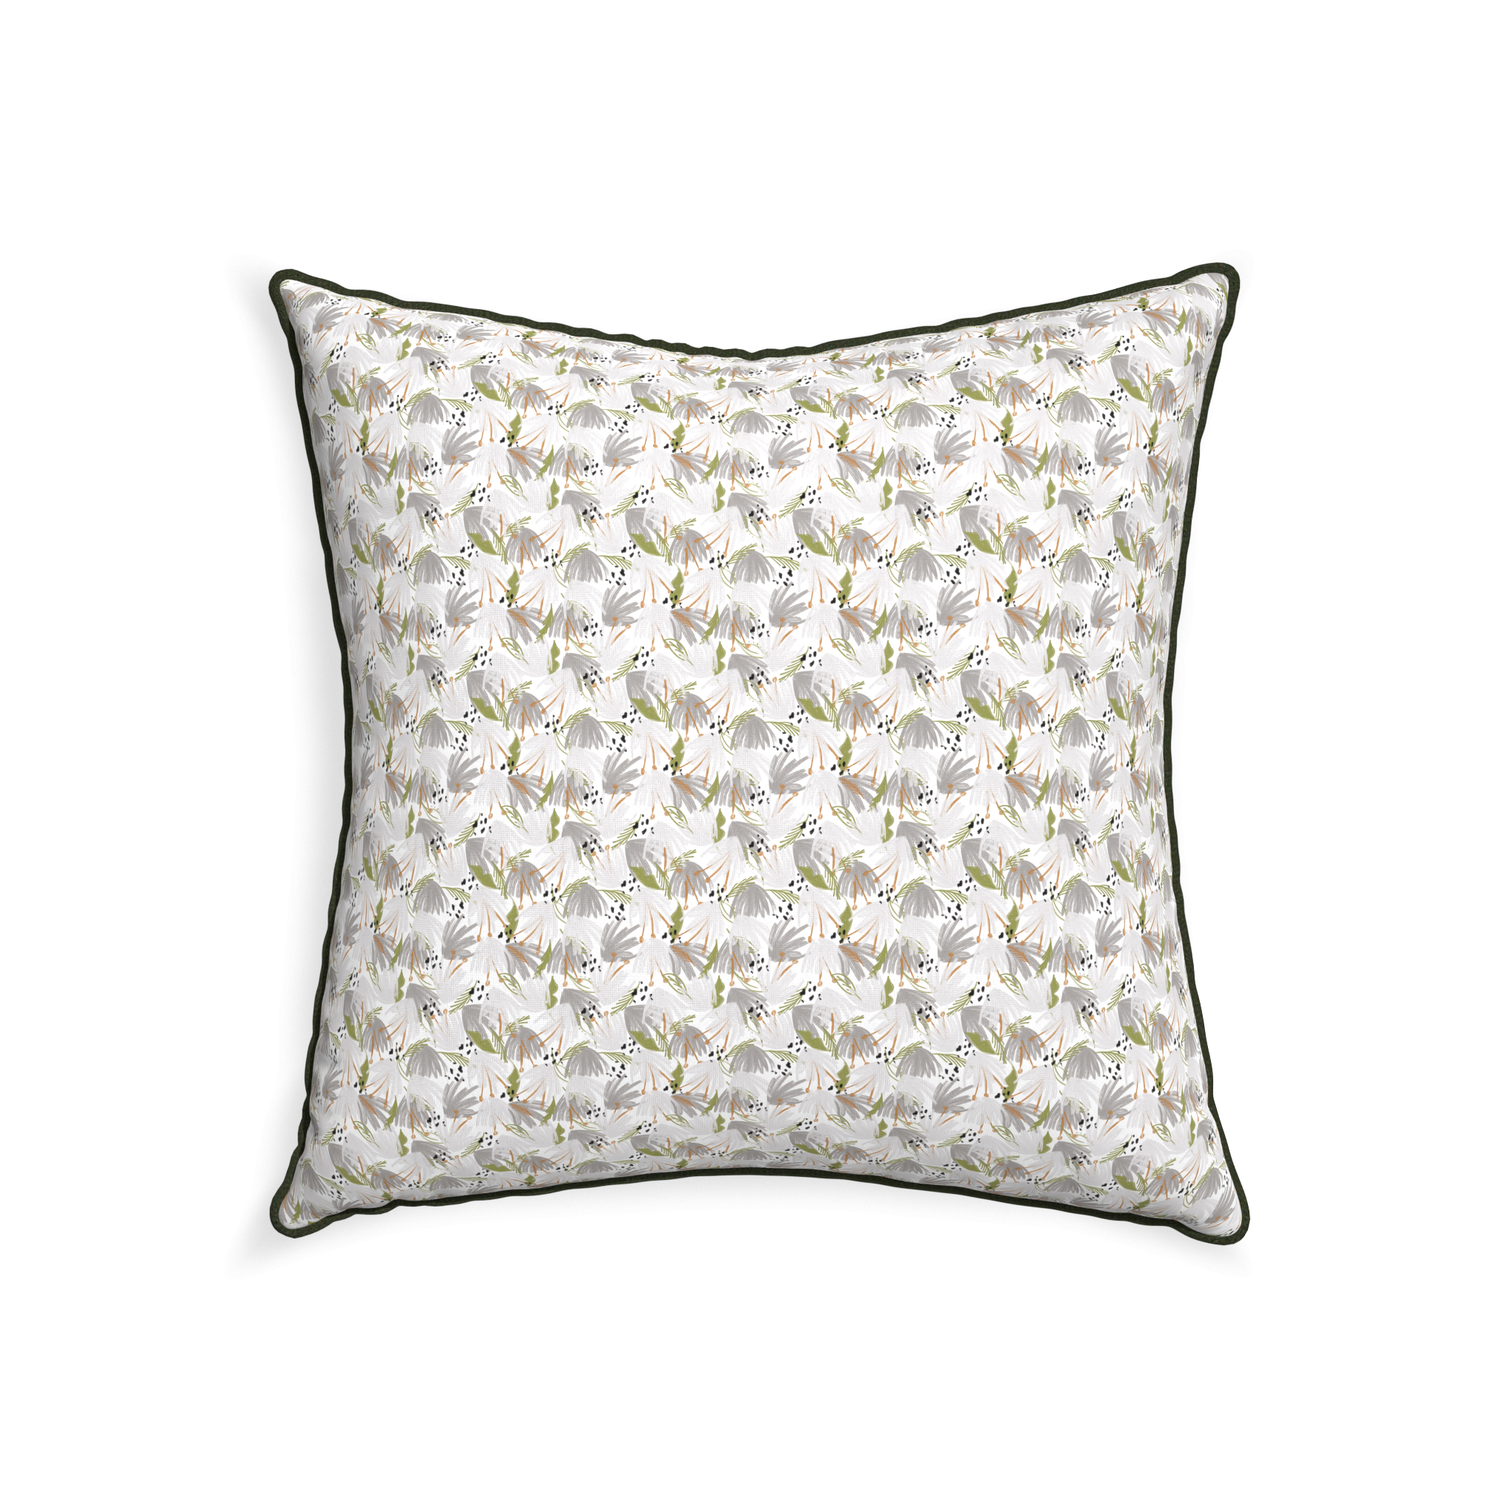 22-square eden grey custom grey floralpillow with f piping on white background